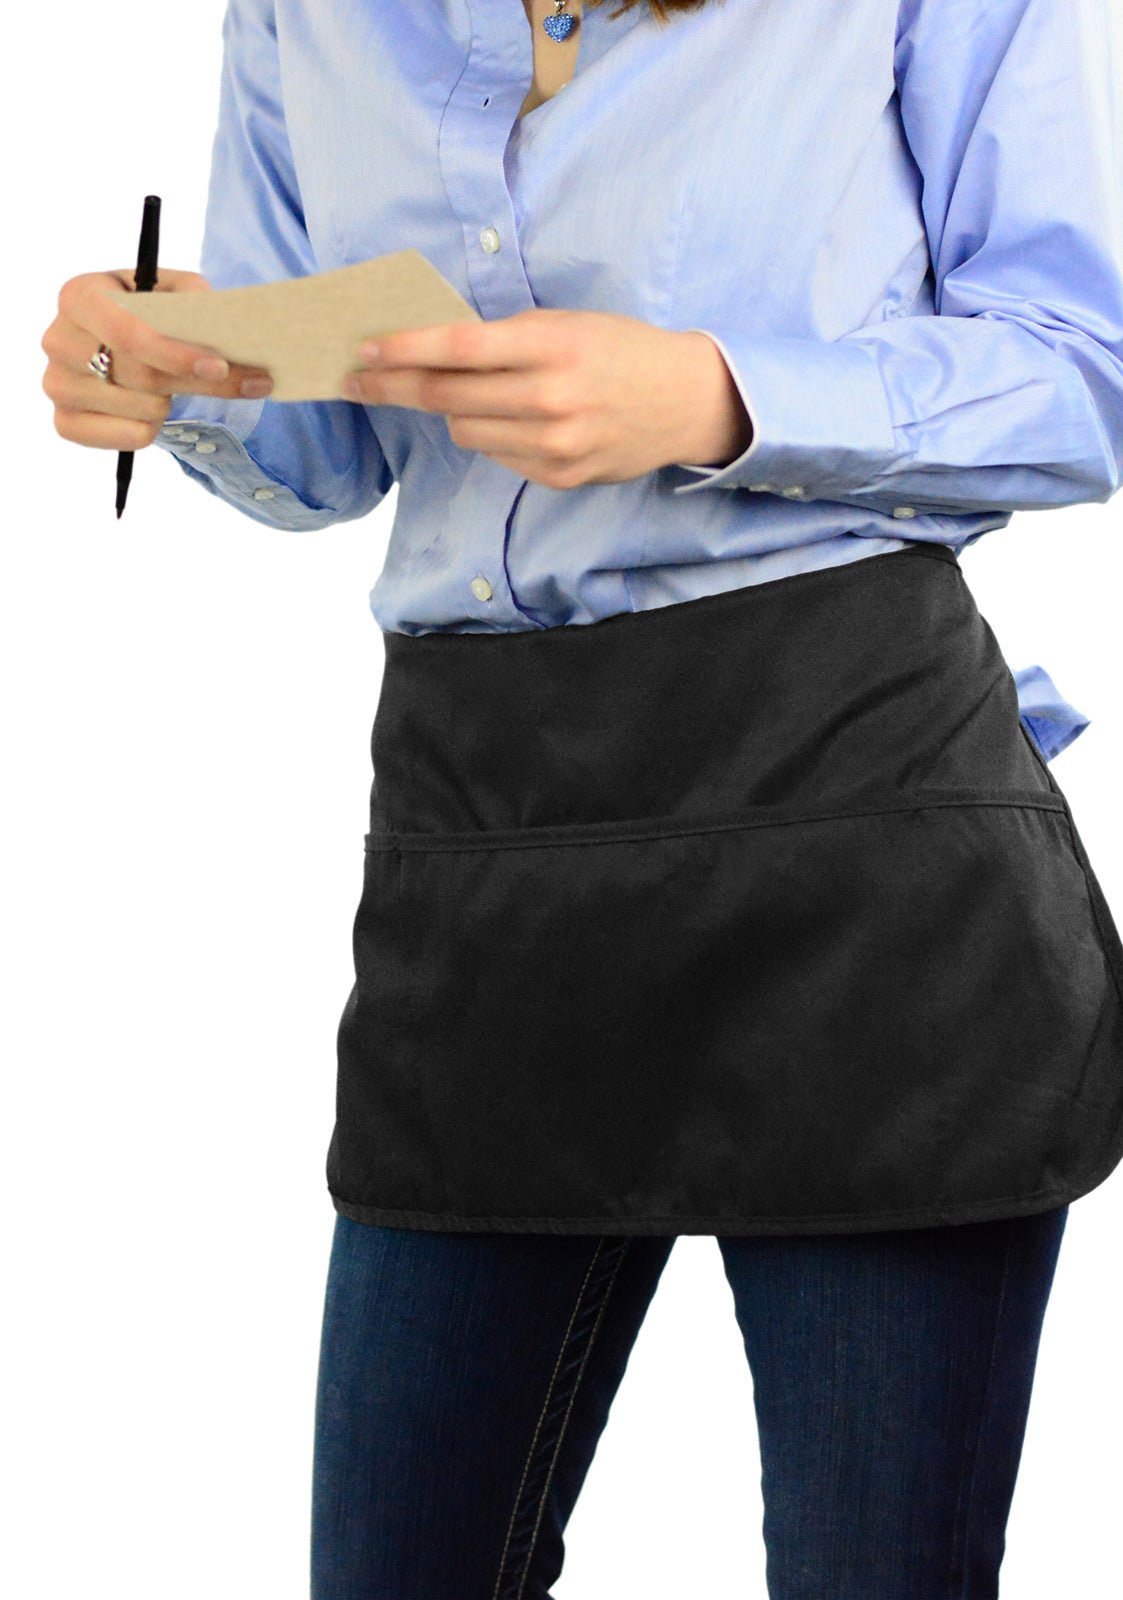 Benstein Grille Black Double sided apron - Mato & Hash